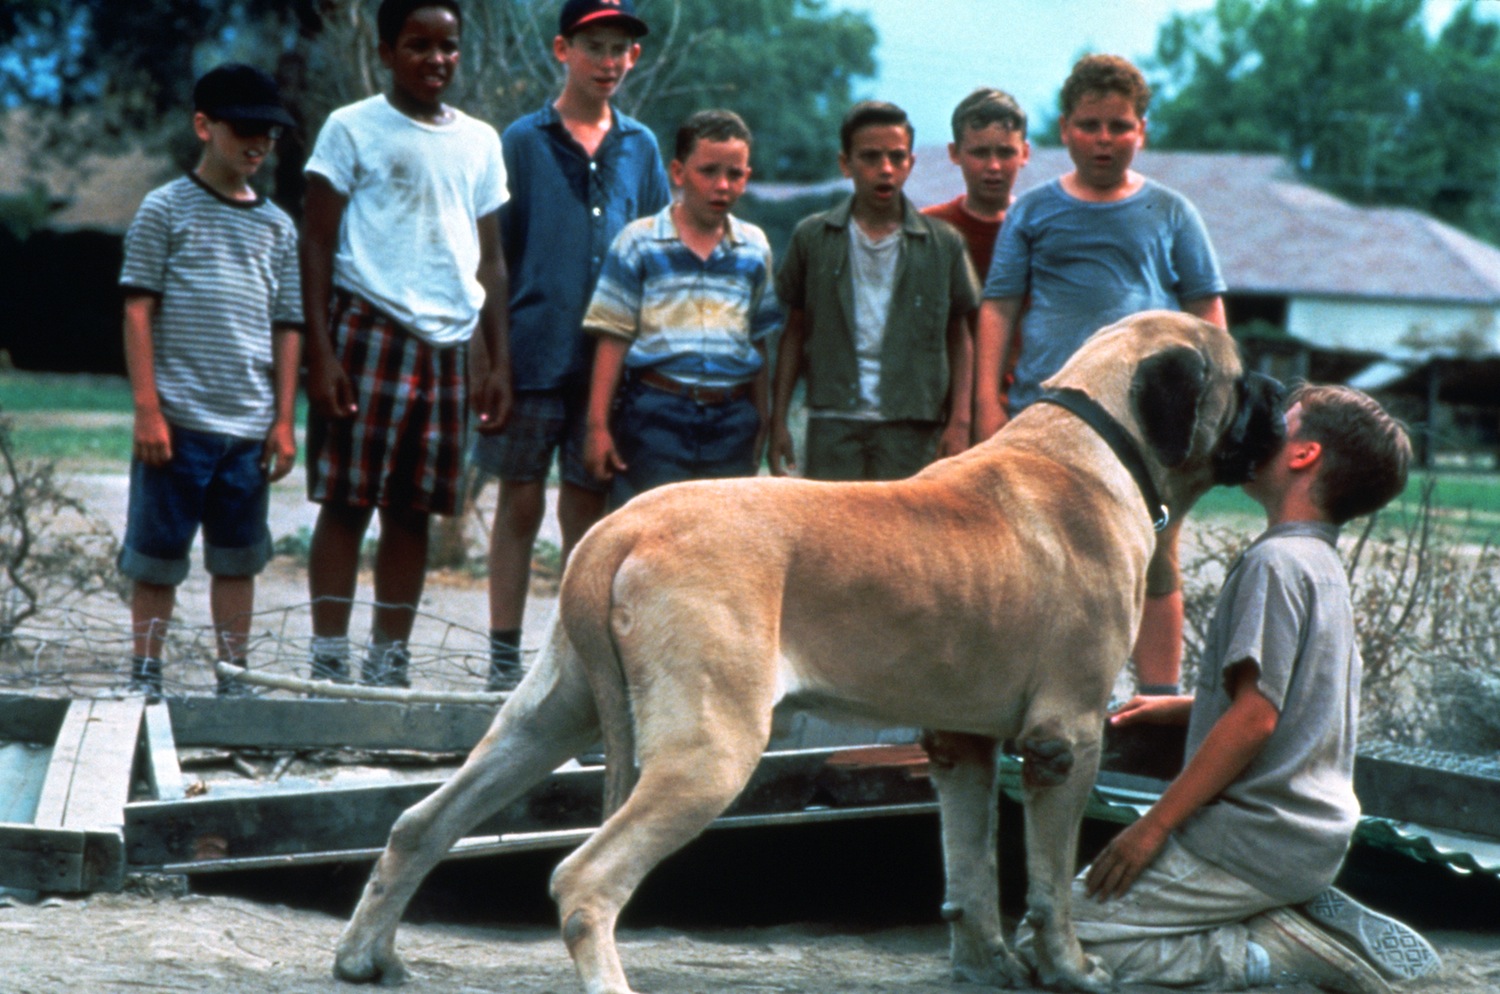 You're Killin' Me Smalls: 20 Revelations About The Sandlot on Its 20th  Anniversary